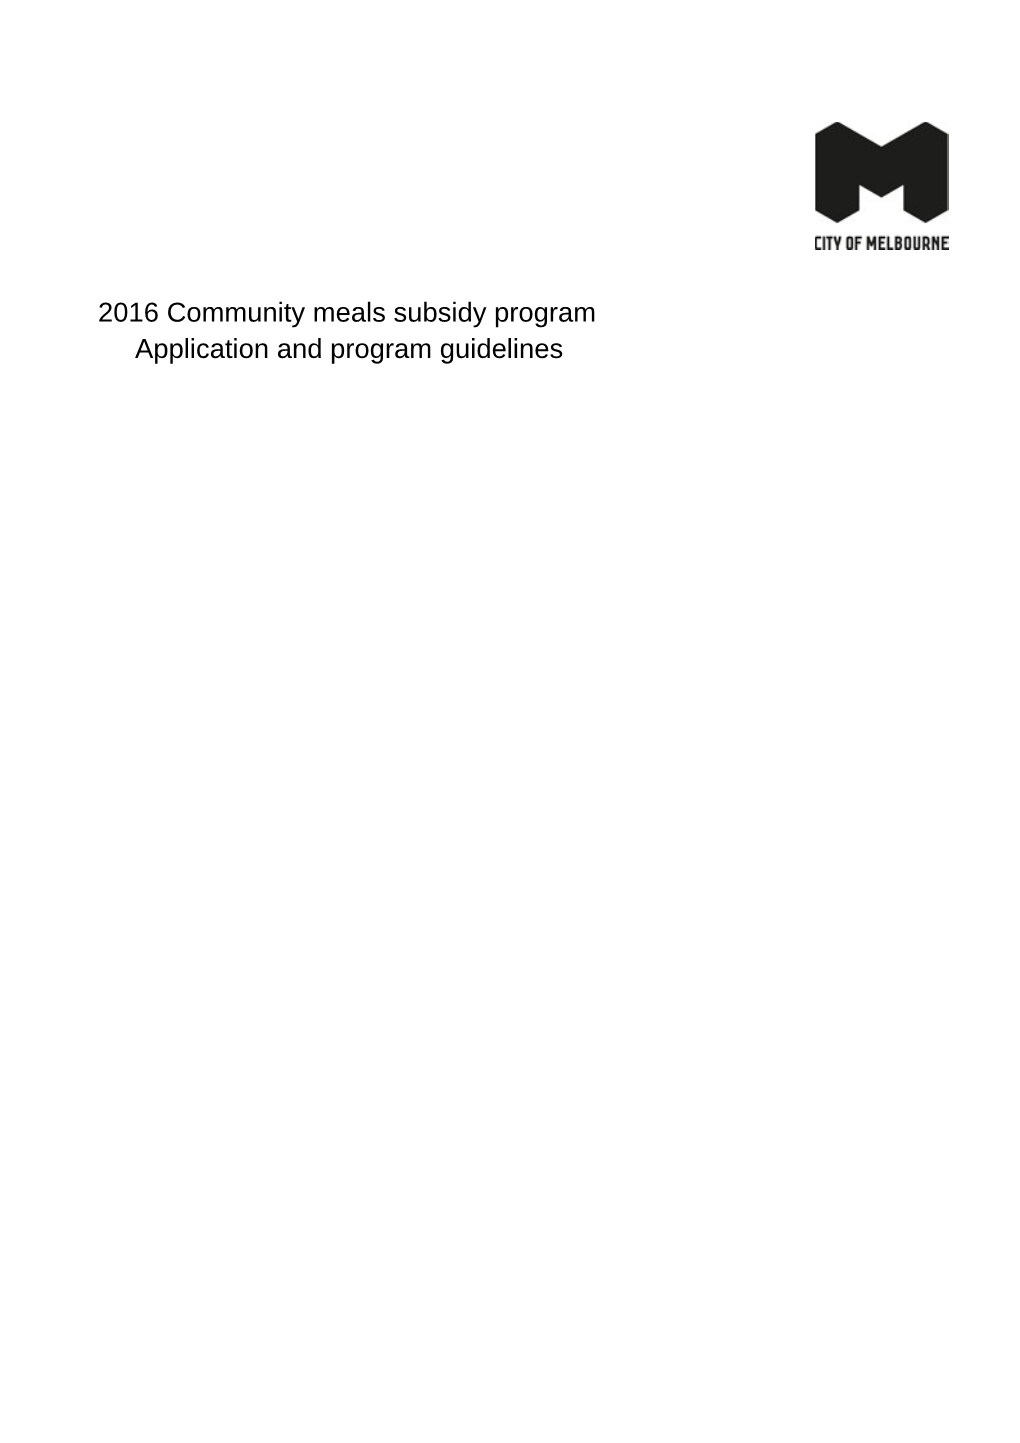 2016 Community Meals Subsidy Program Guidelines